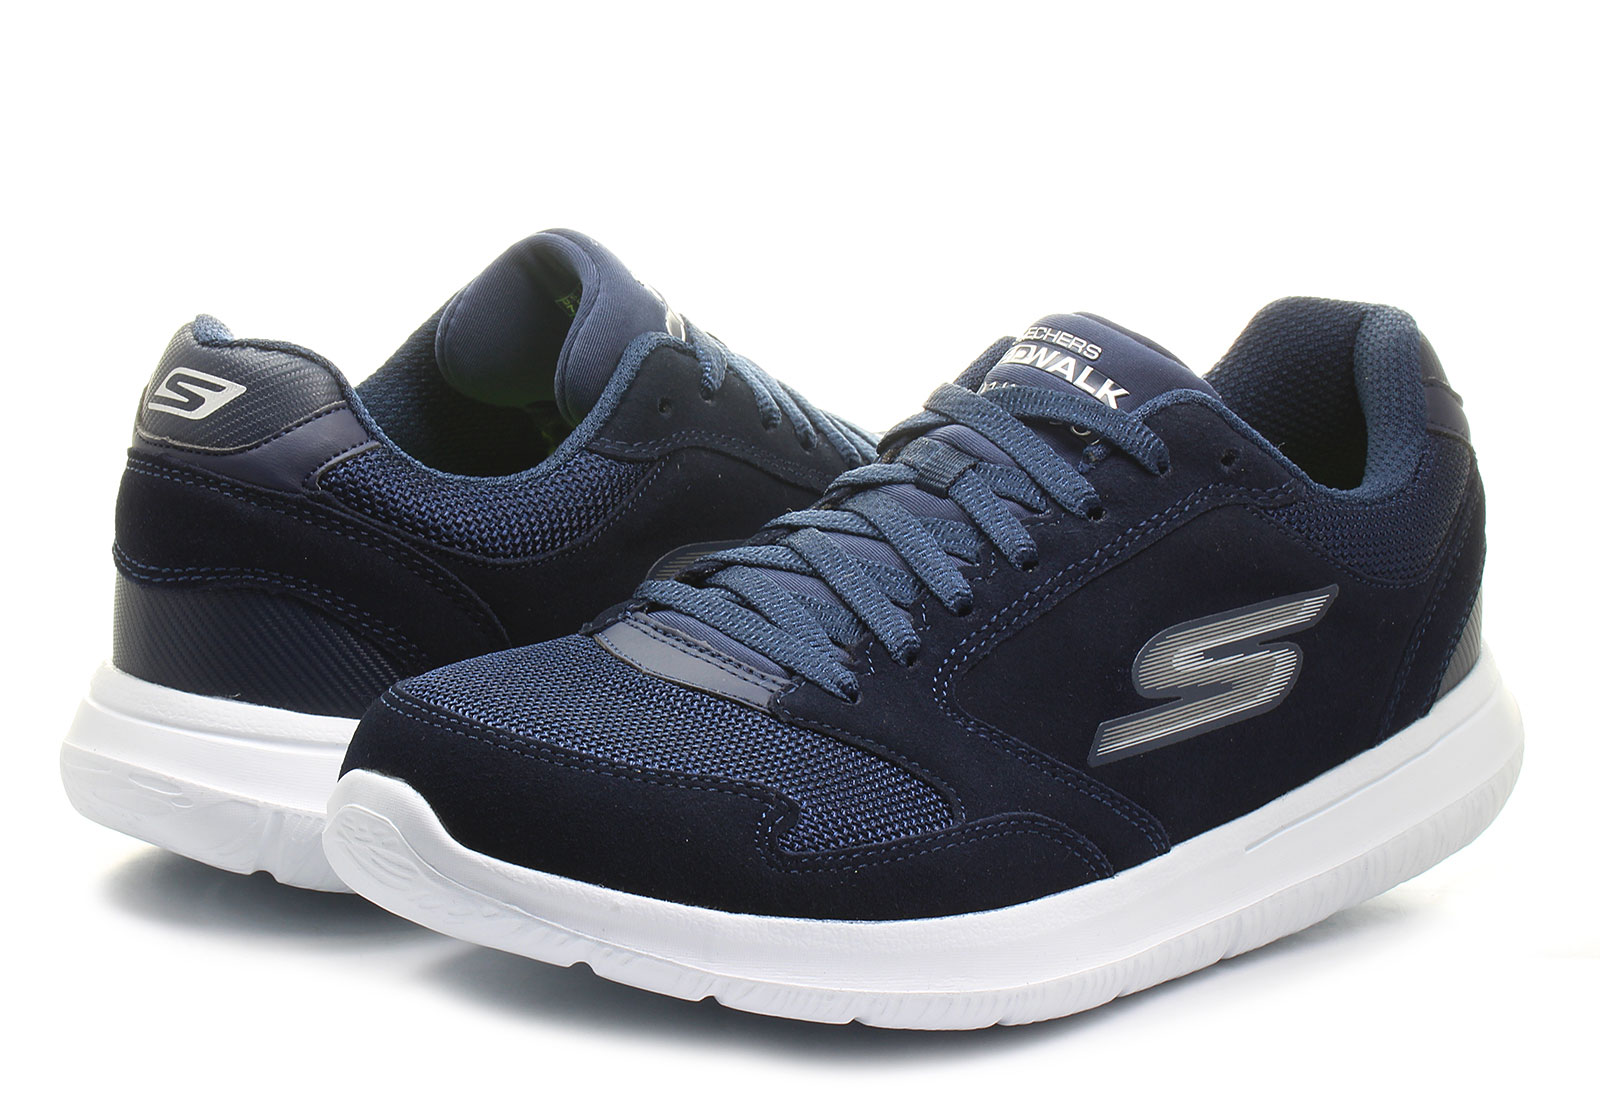 Skechers Shoes - Champion - 53827-nvw - Online shop for sneakers, shoes ...